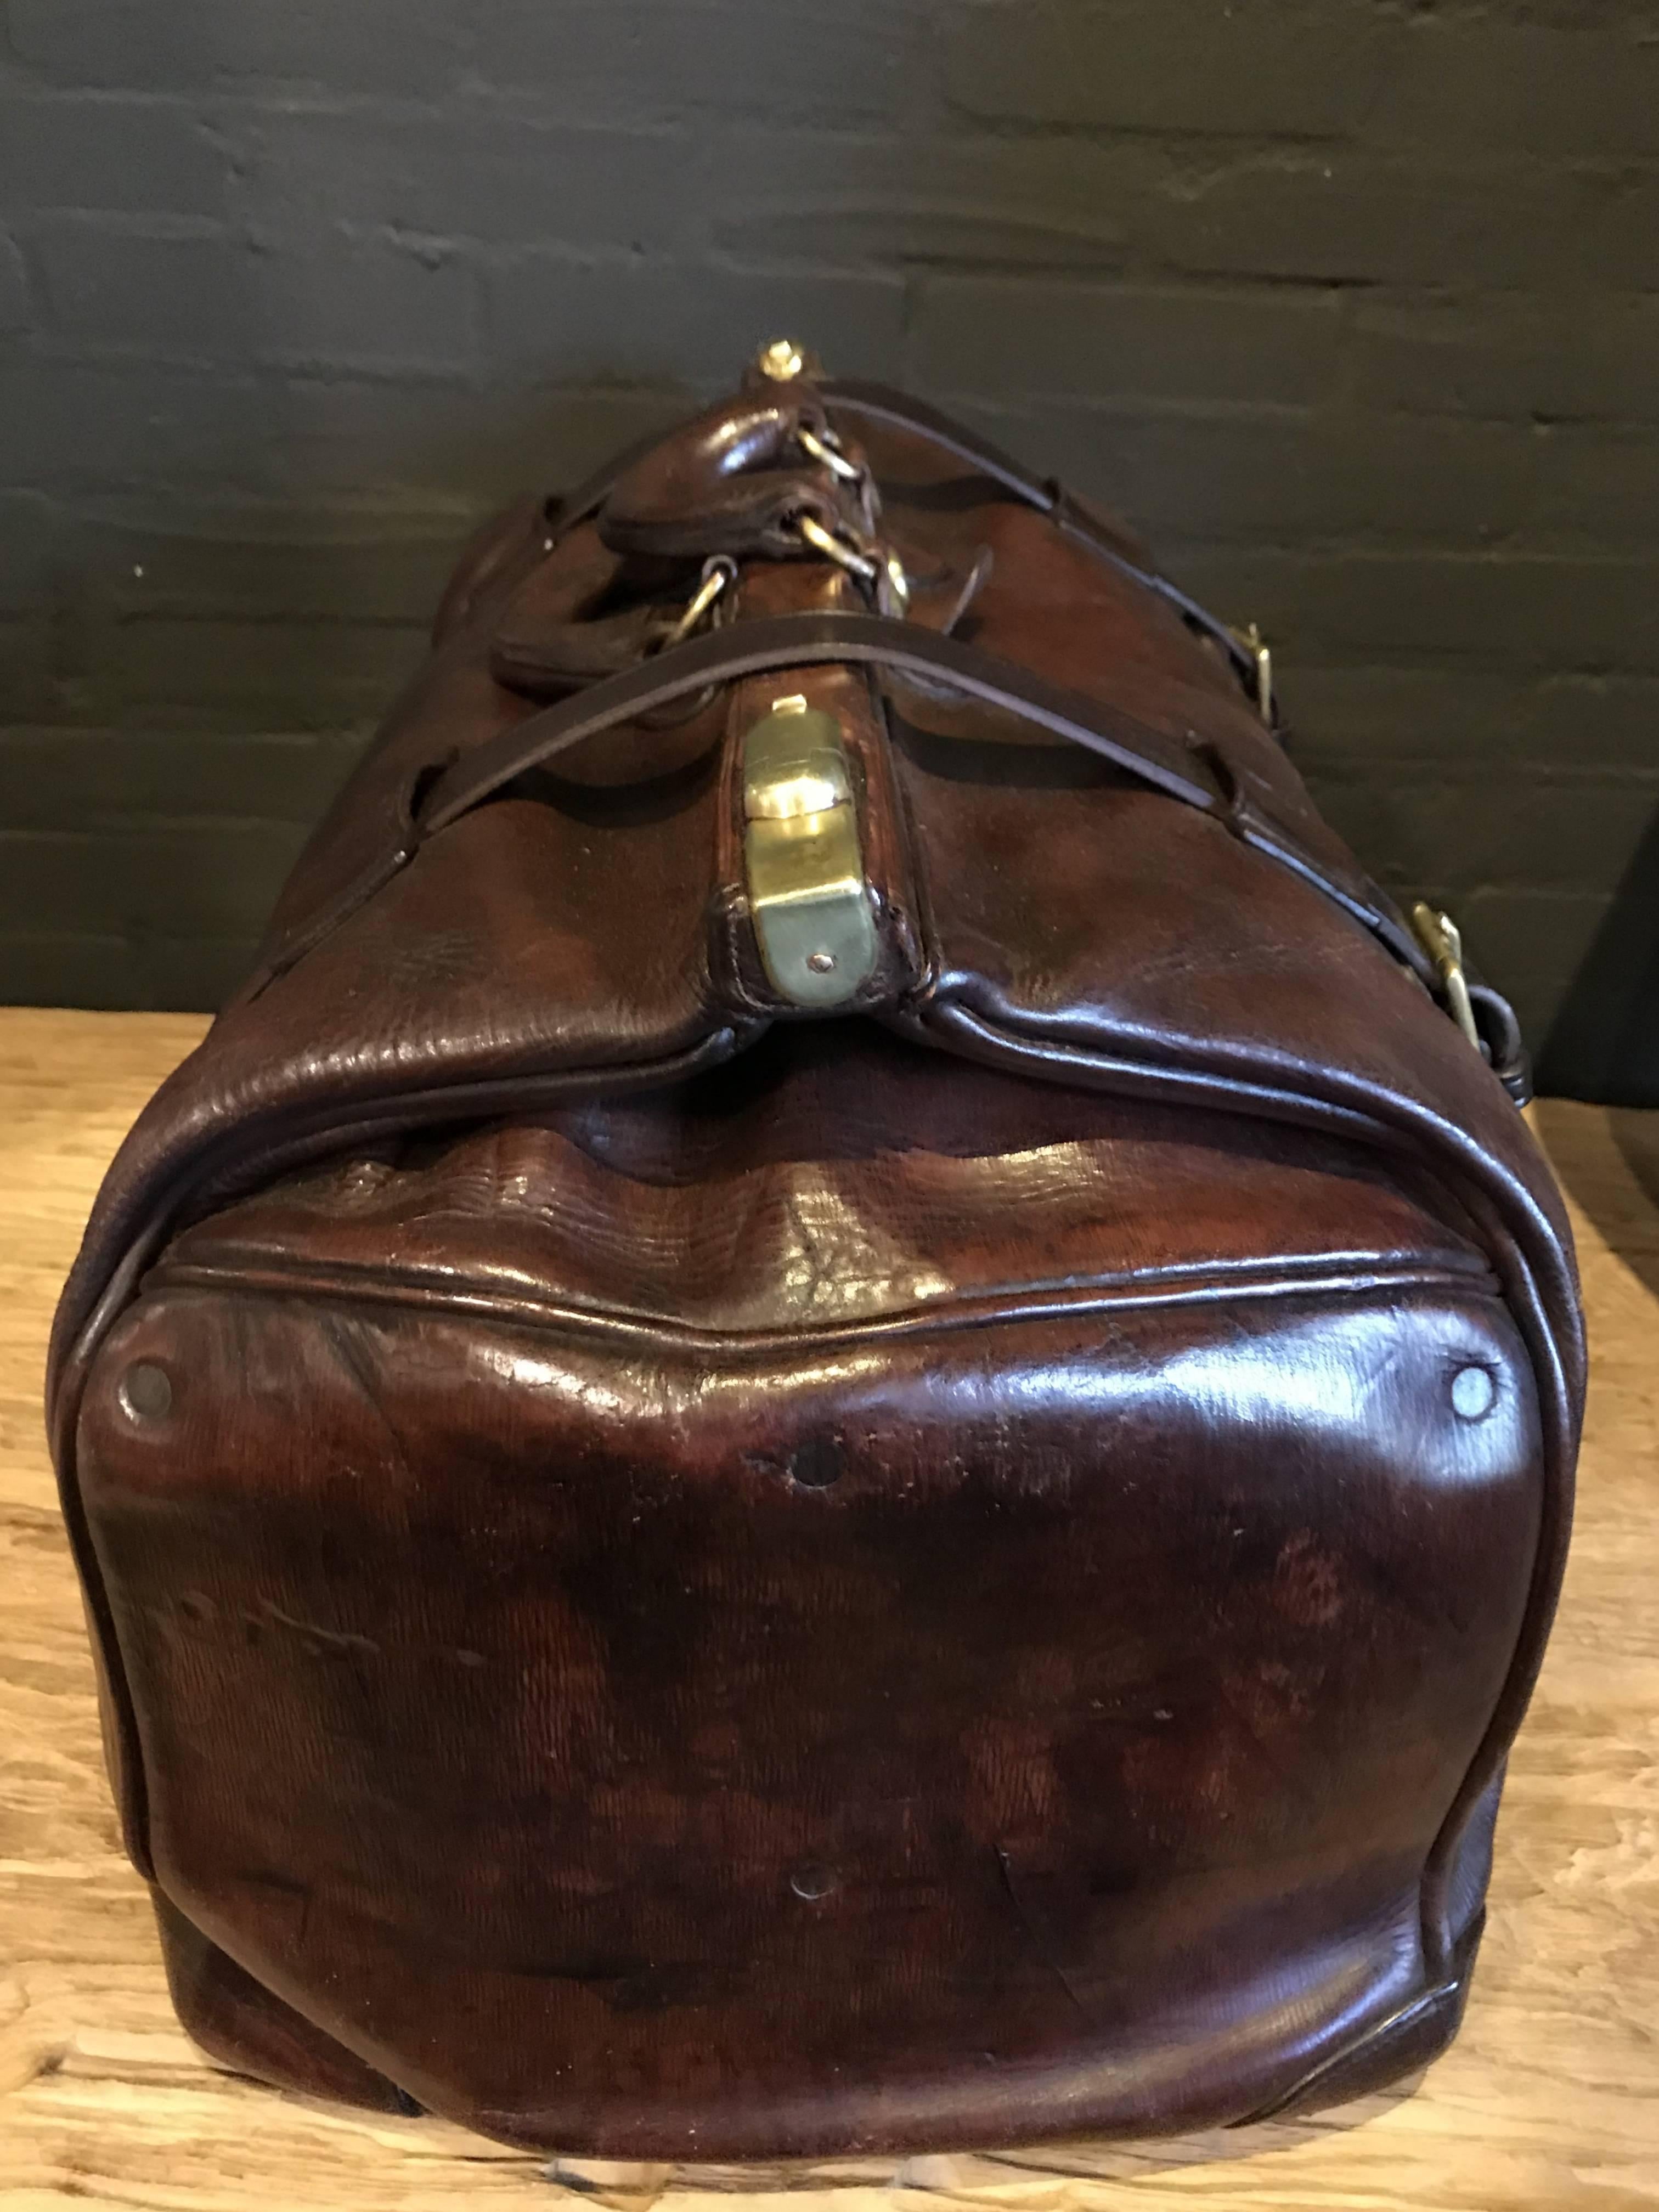 gladstone bag made in england